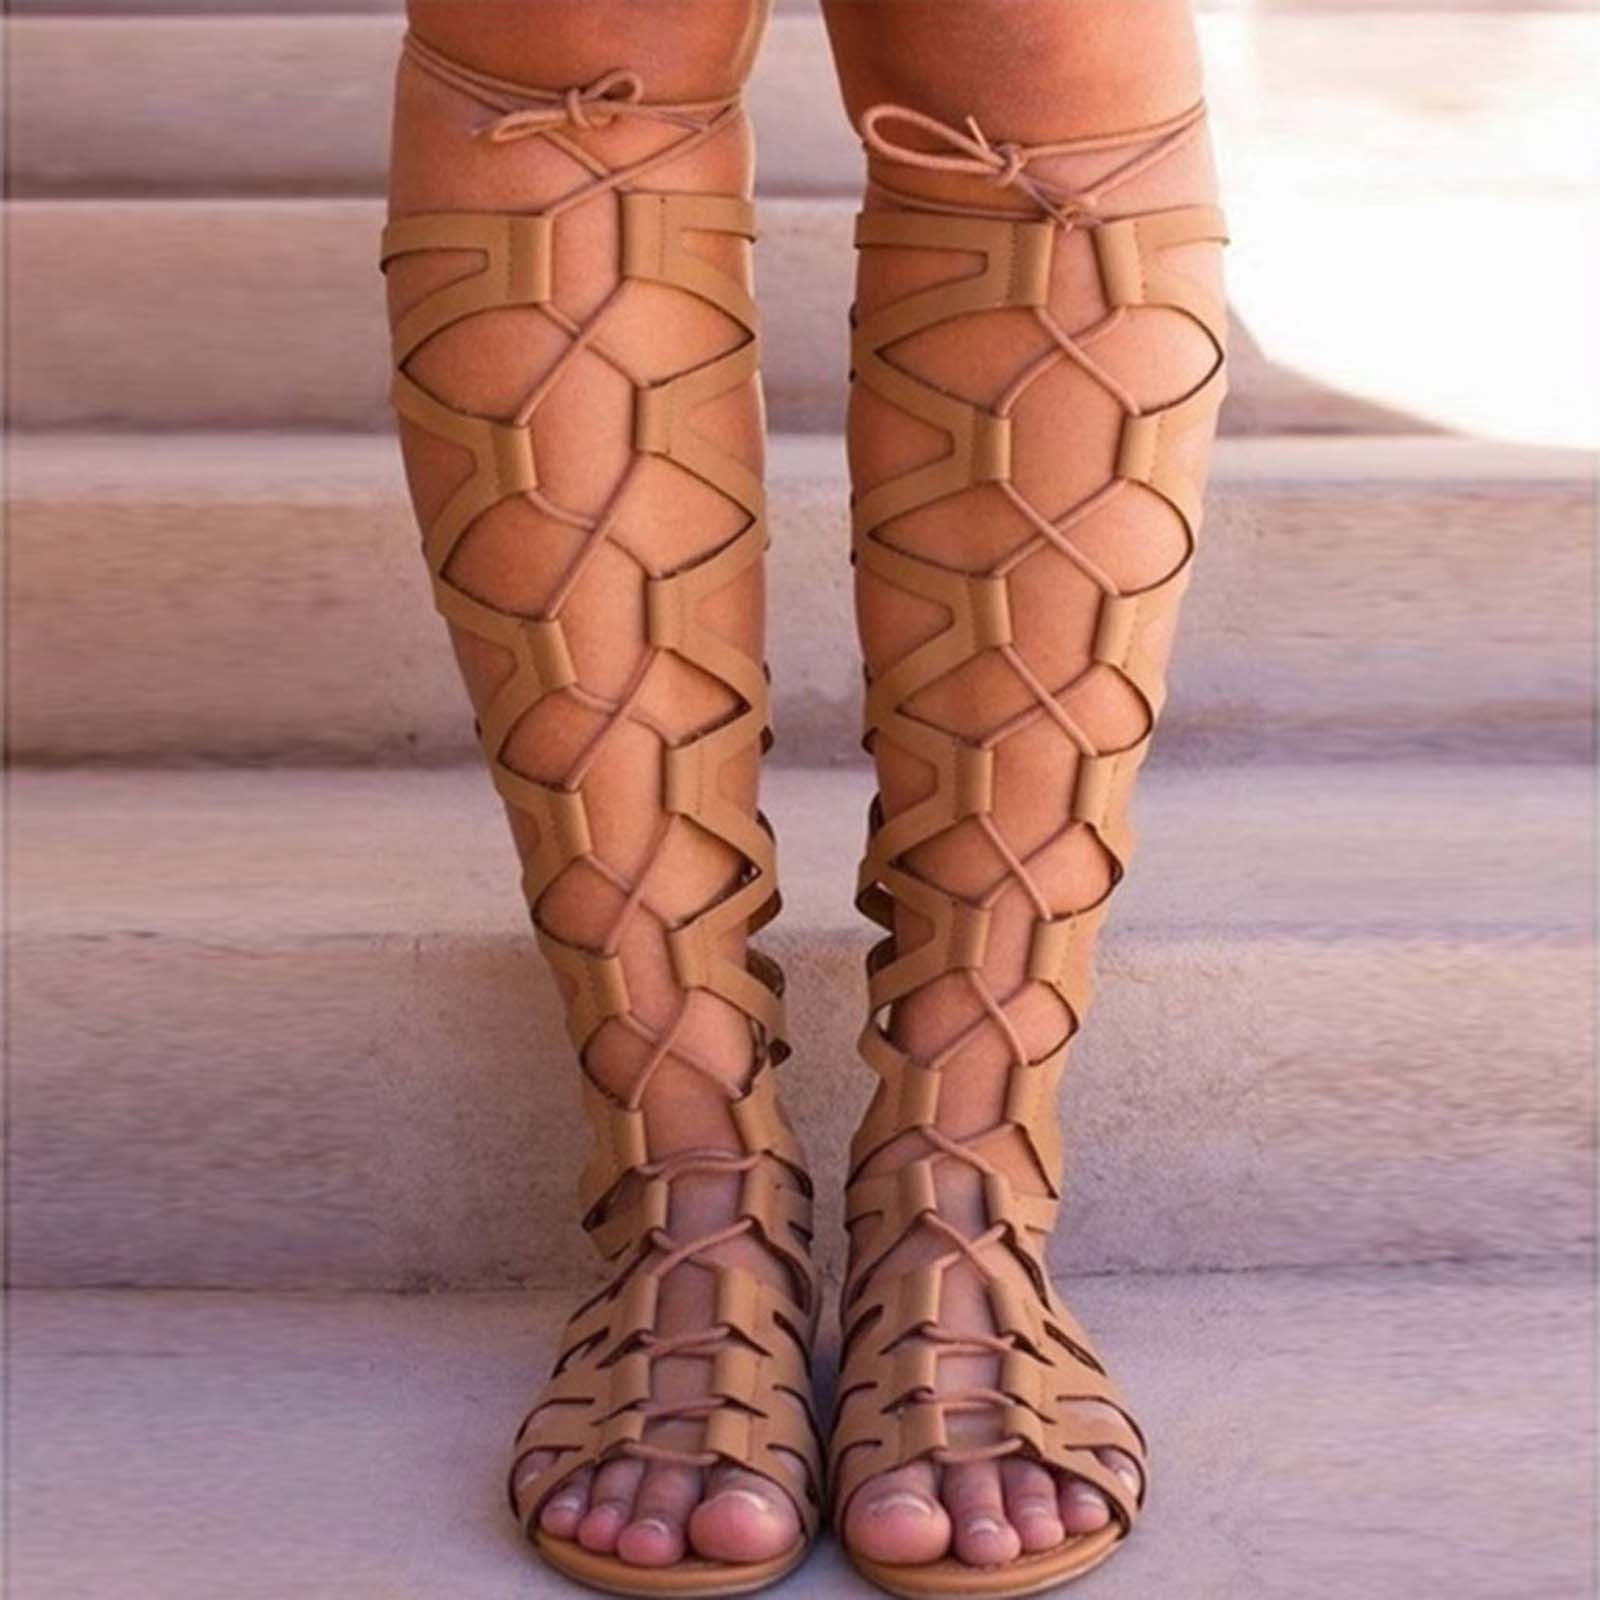 The Man Repeller Wears Gladiator Sandals On Instagram, So It's Clearly Time  To Revisit That Trend